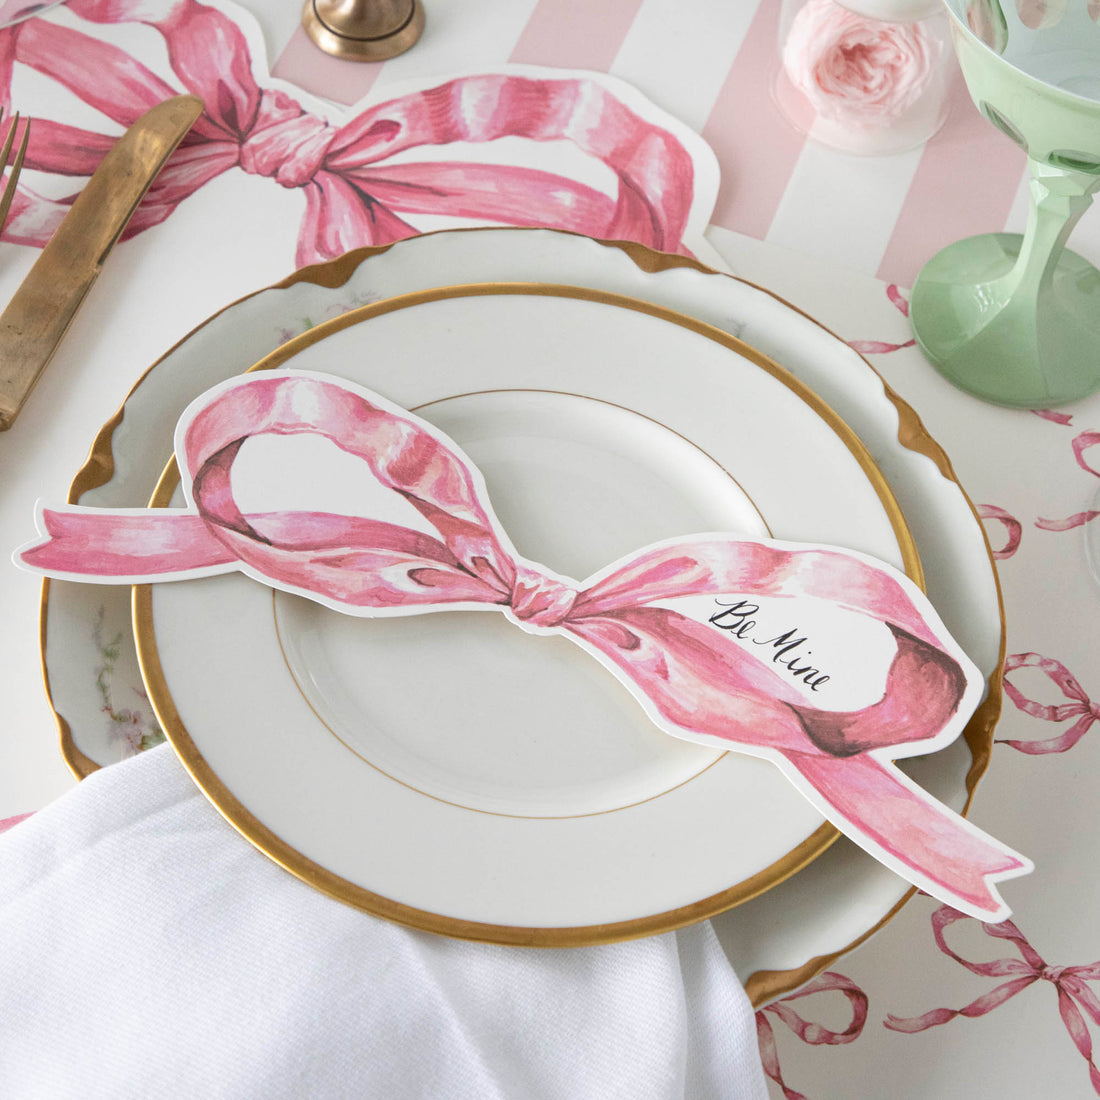 A Pink Bow Table Accent with &quot;Be Mine&quot; written in the blank space in the right bow loop resting on the plate of a pink place setting.